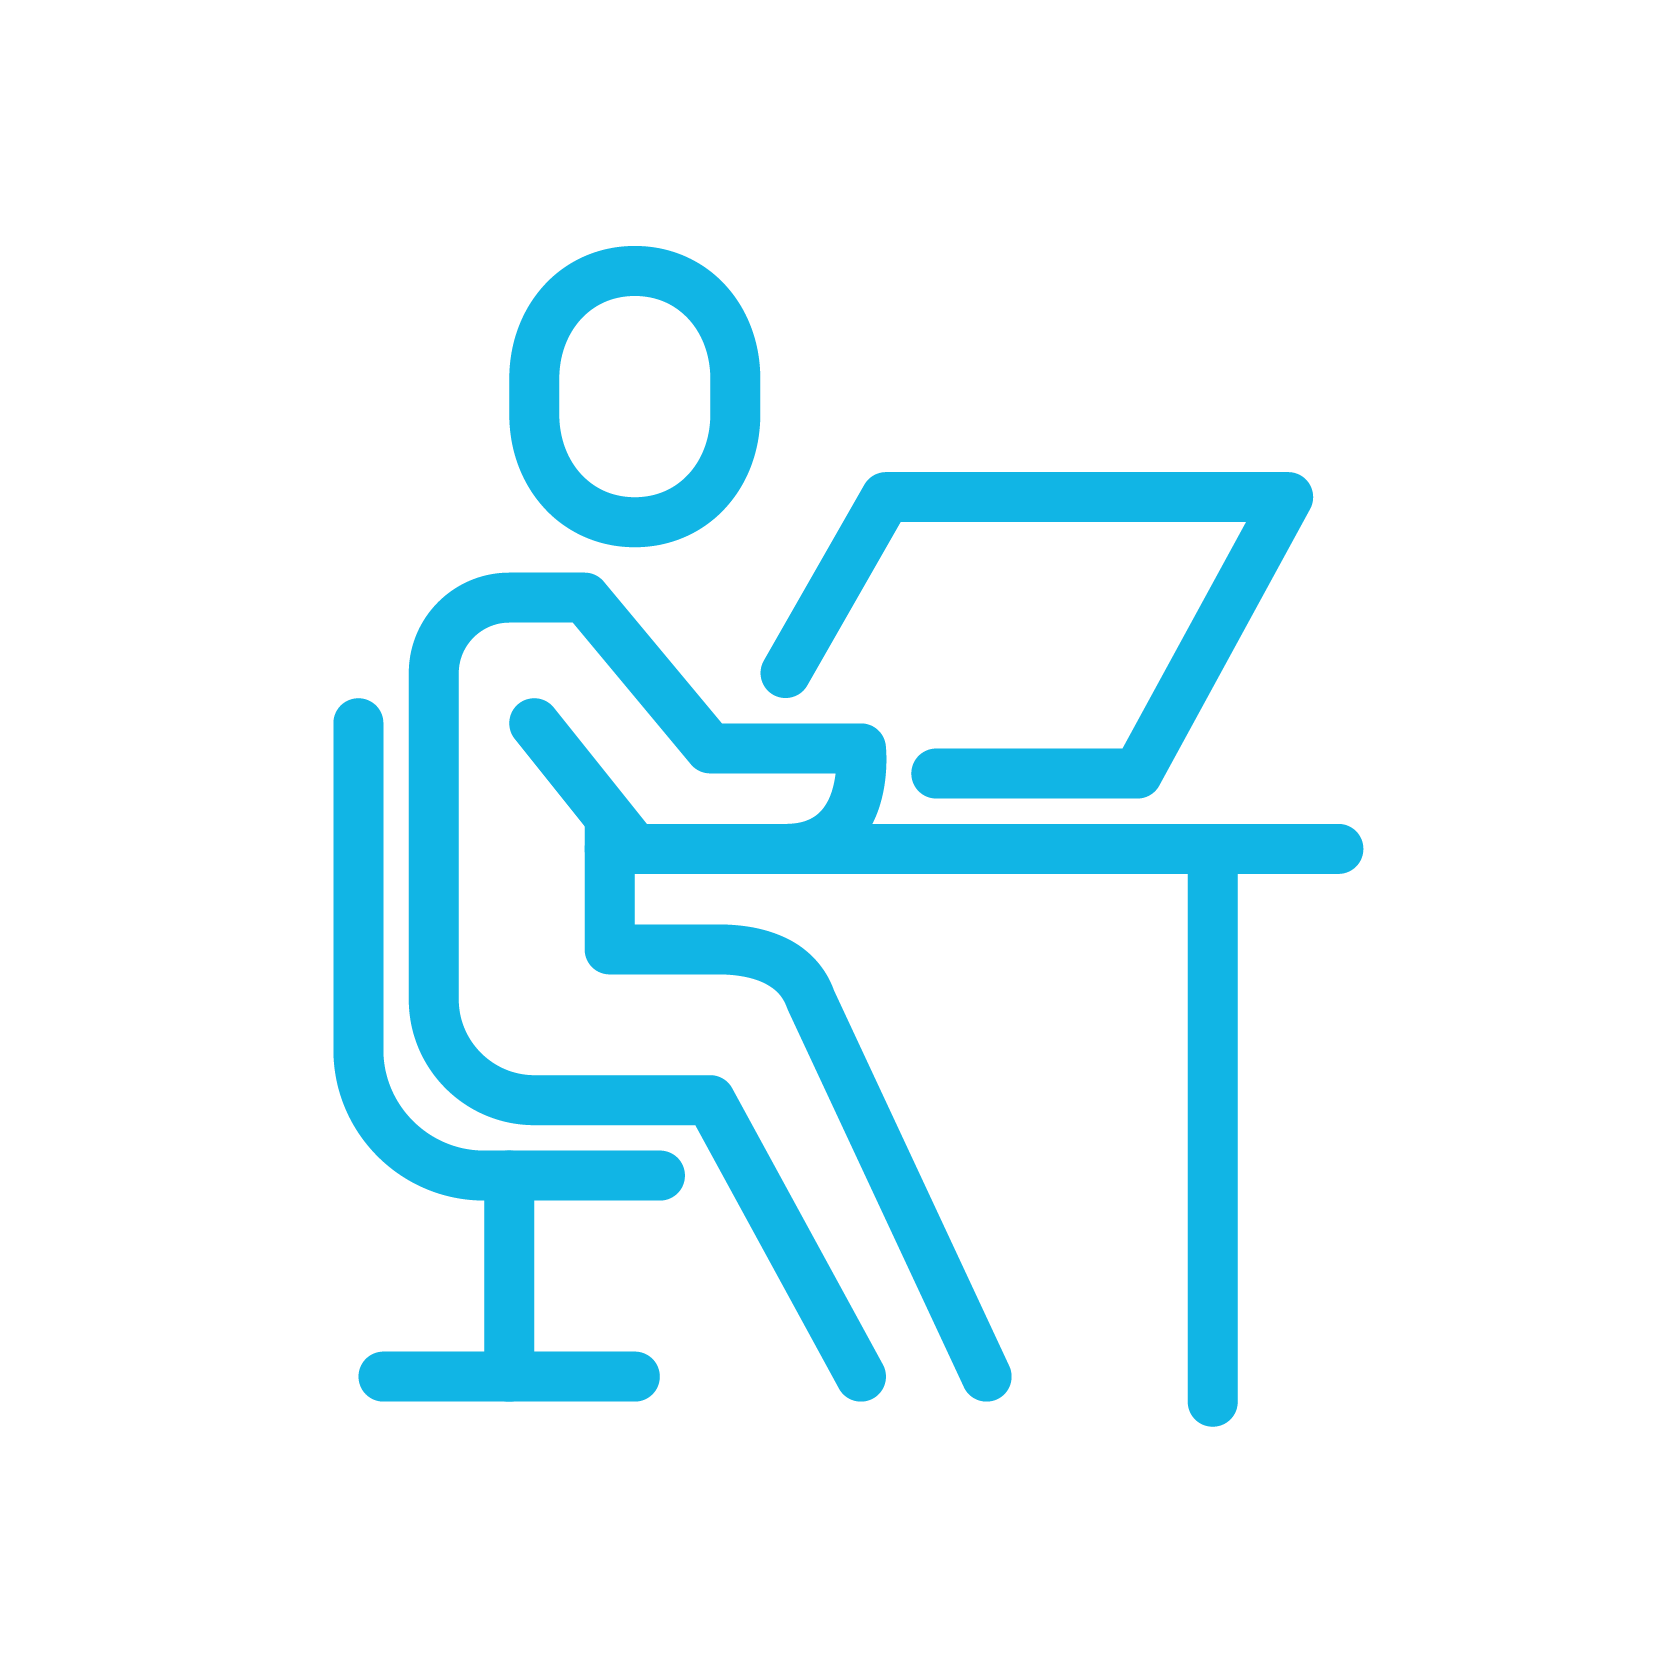 Comprehensive Training - Icon of a person sitting at a desk with a computer in front of them.  This represents the fact that HammerTech offers in-person and/or virtual training options for a smooth onboarding process.